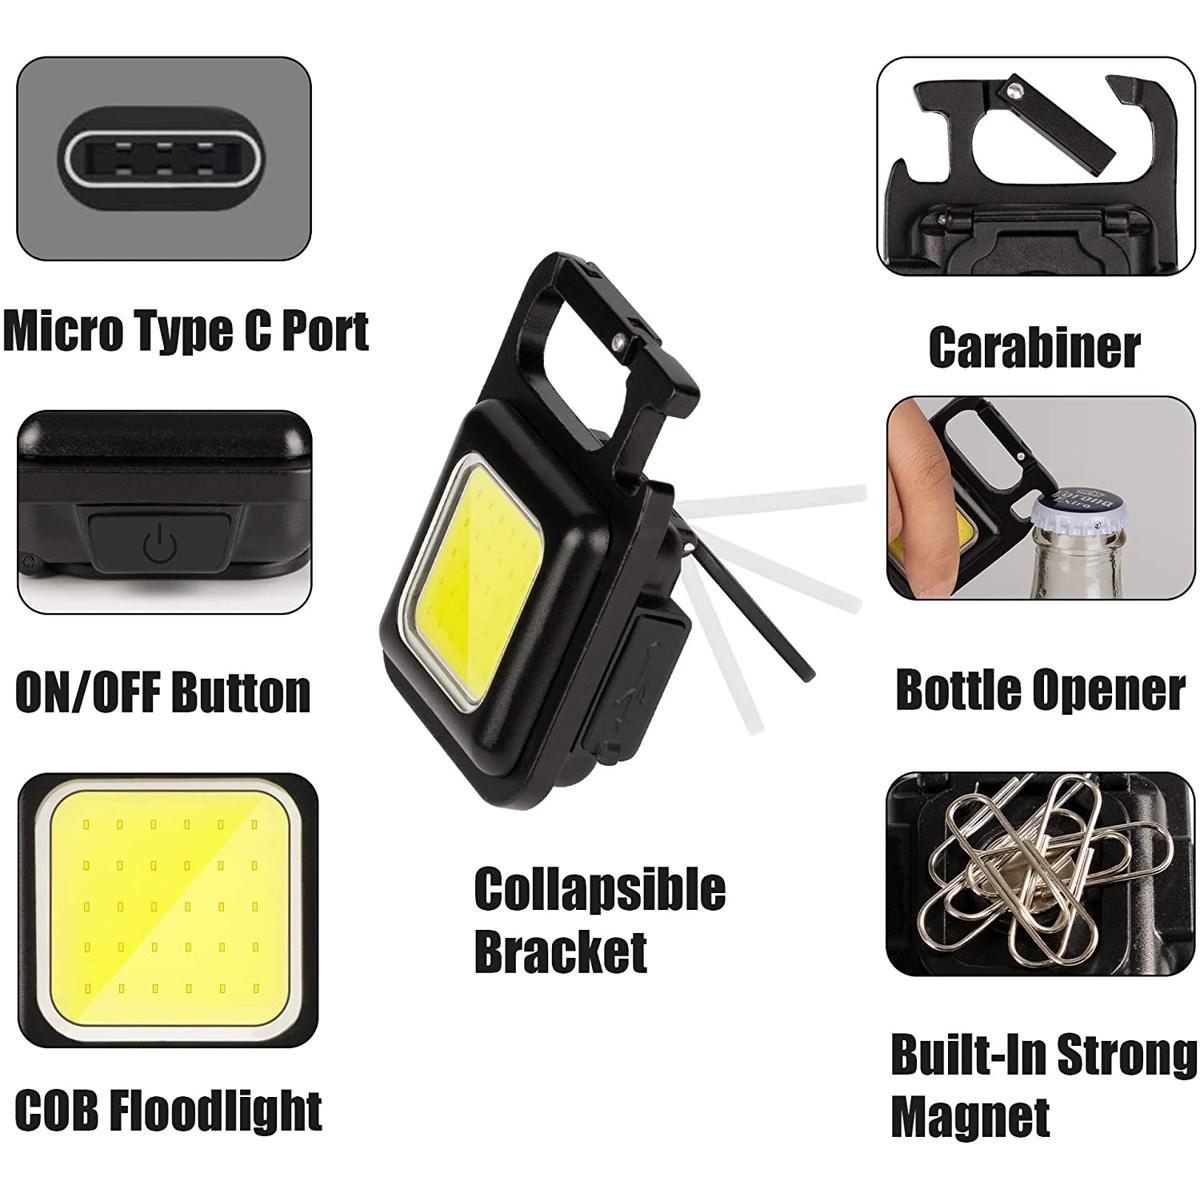 New Decorations Rechargeable Fames Latest wonderful  Amazing Cob light keychain light working light stillest light had light with Bottle Opener or Outdoor Fishing Walking Camping any thing available in this items